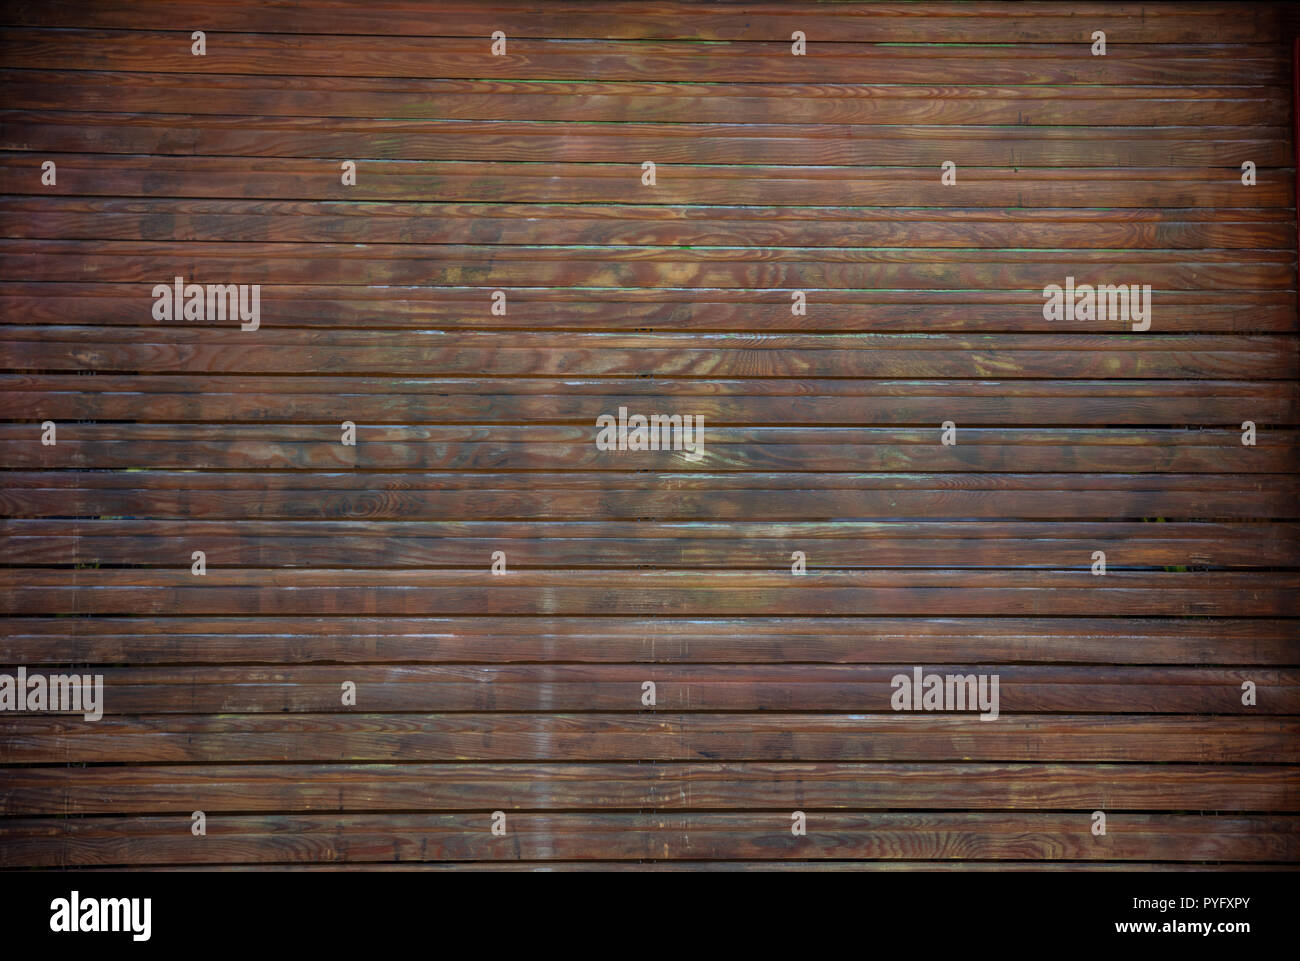 Wooden horizontal planks background, texture. Wooden floor or wall Stock Photo